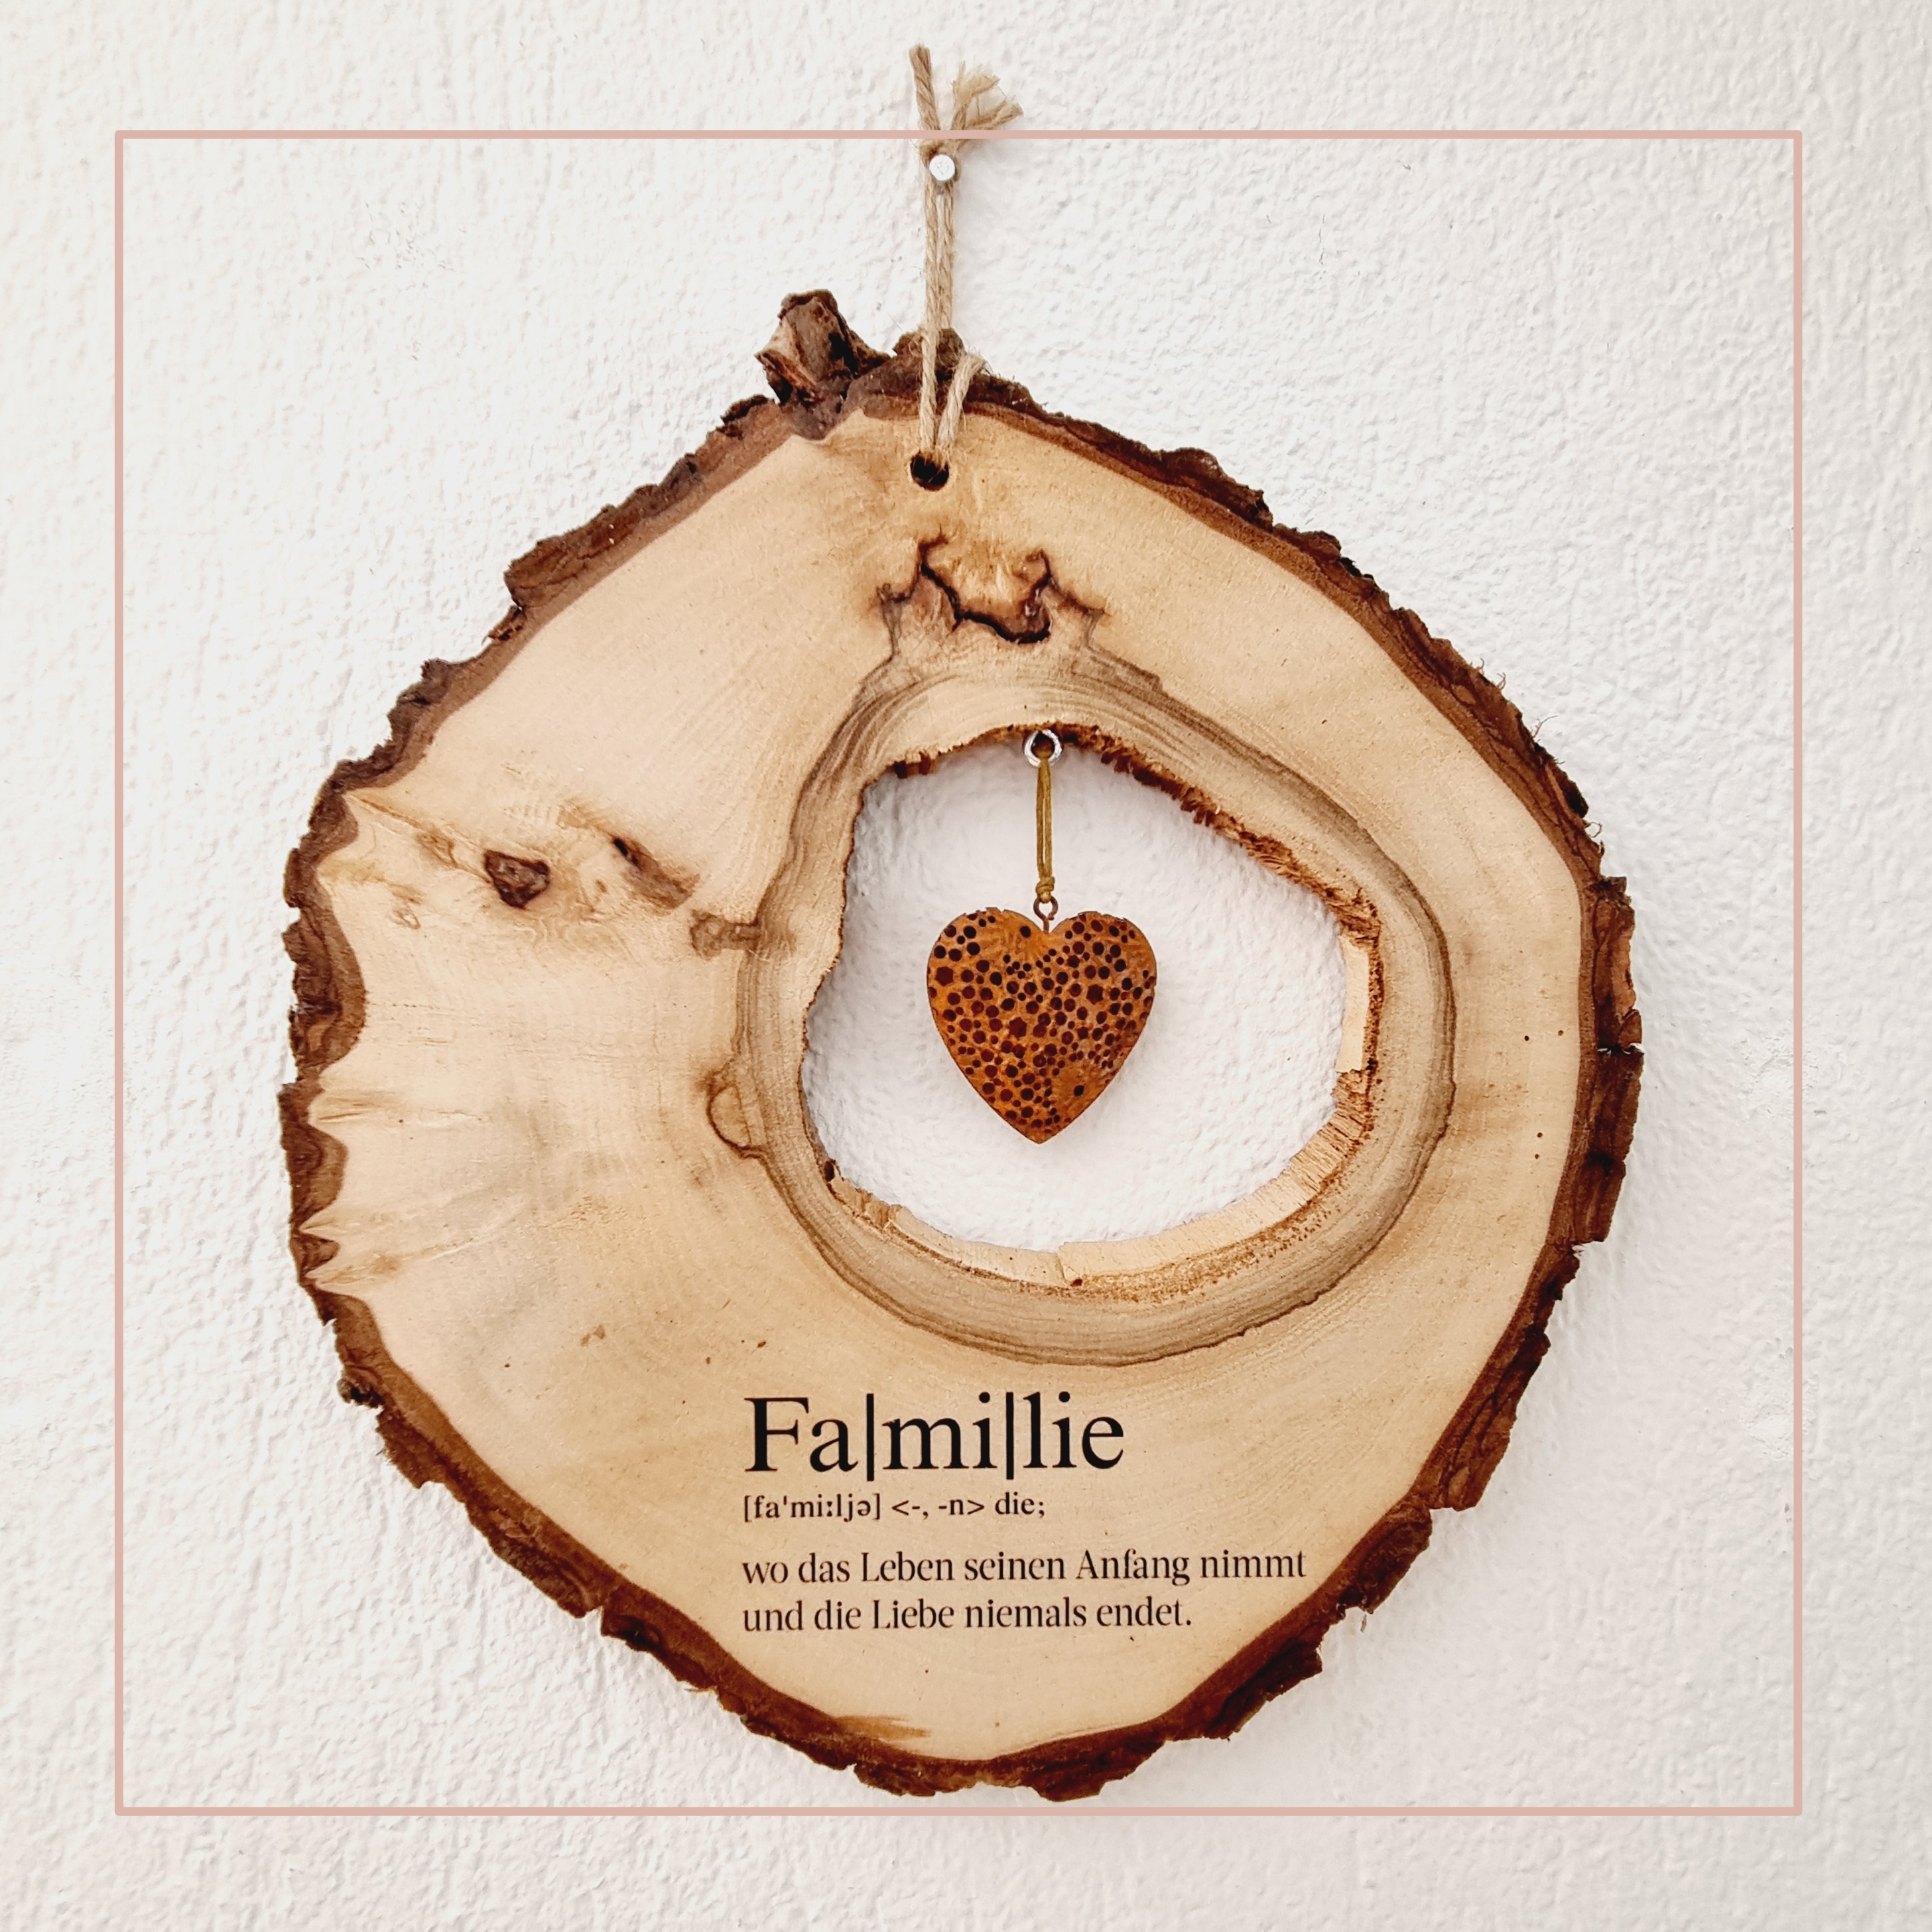 Holzscheibe "Familie"